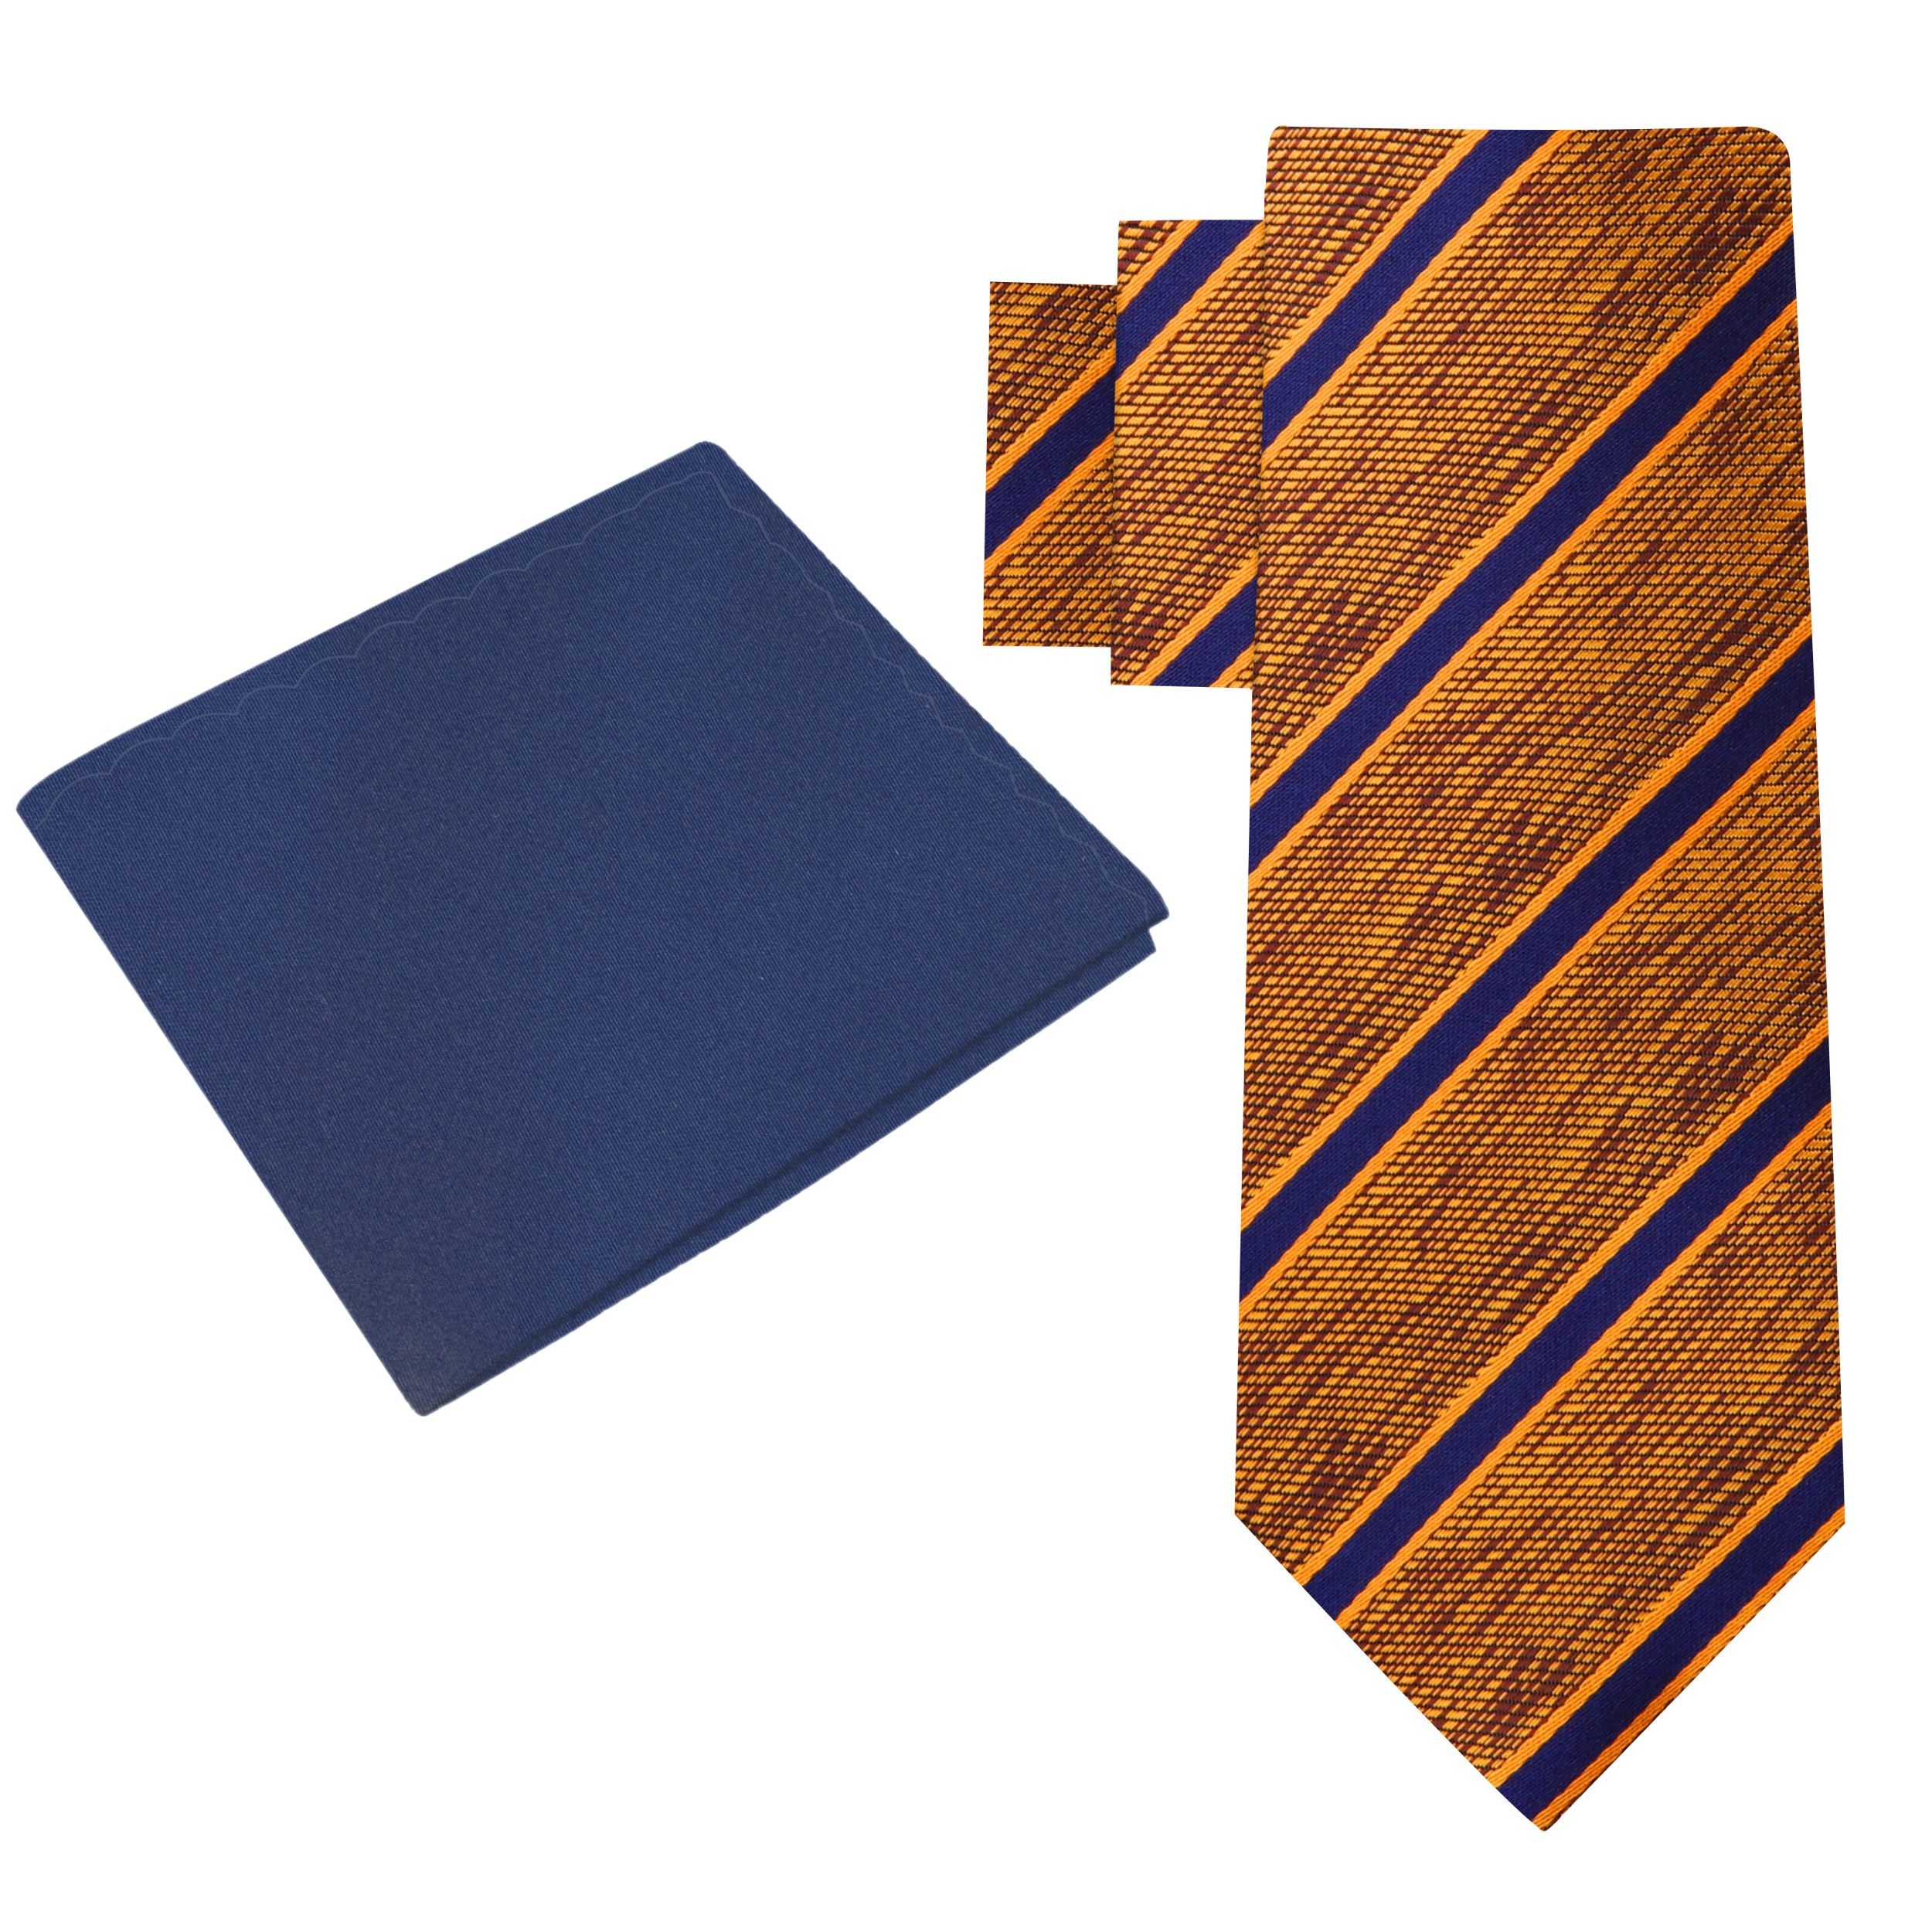 Man Checked Deep Blue Tie Blue Pink Bordeaux Lines Tone on Tone Red Polka Dots Contrast Knot